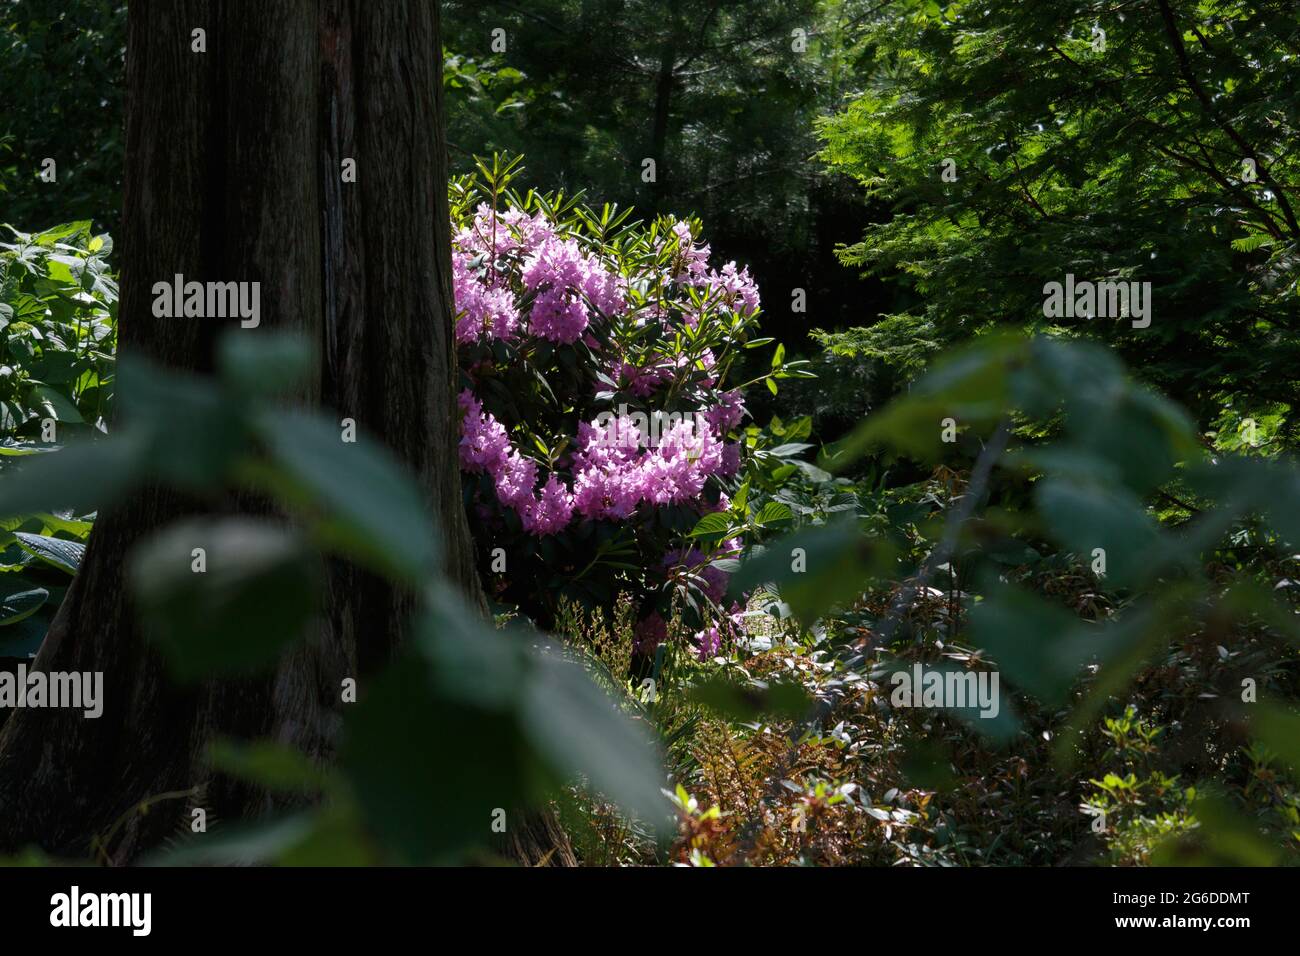 woodland scene with sun shining through the trees directly hitting a lavender rhododendron shrub in full bloom next to a large tree trunk and surround Stock Photo